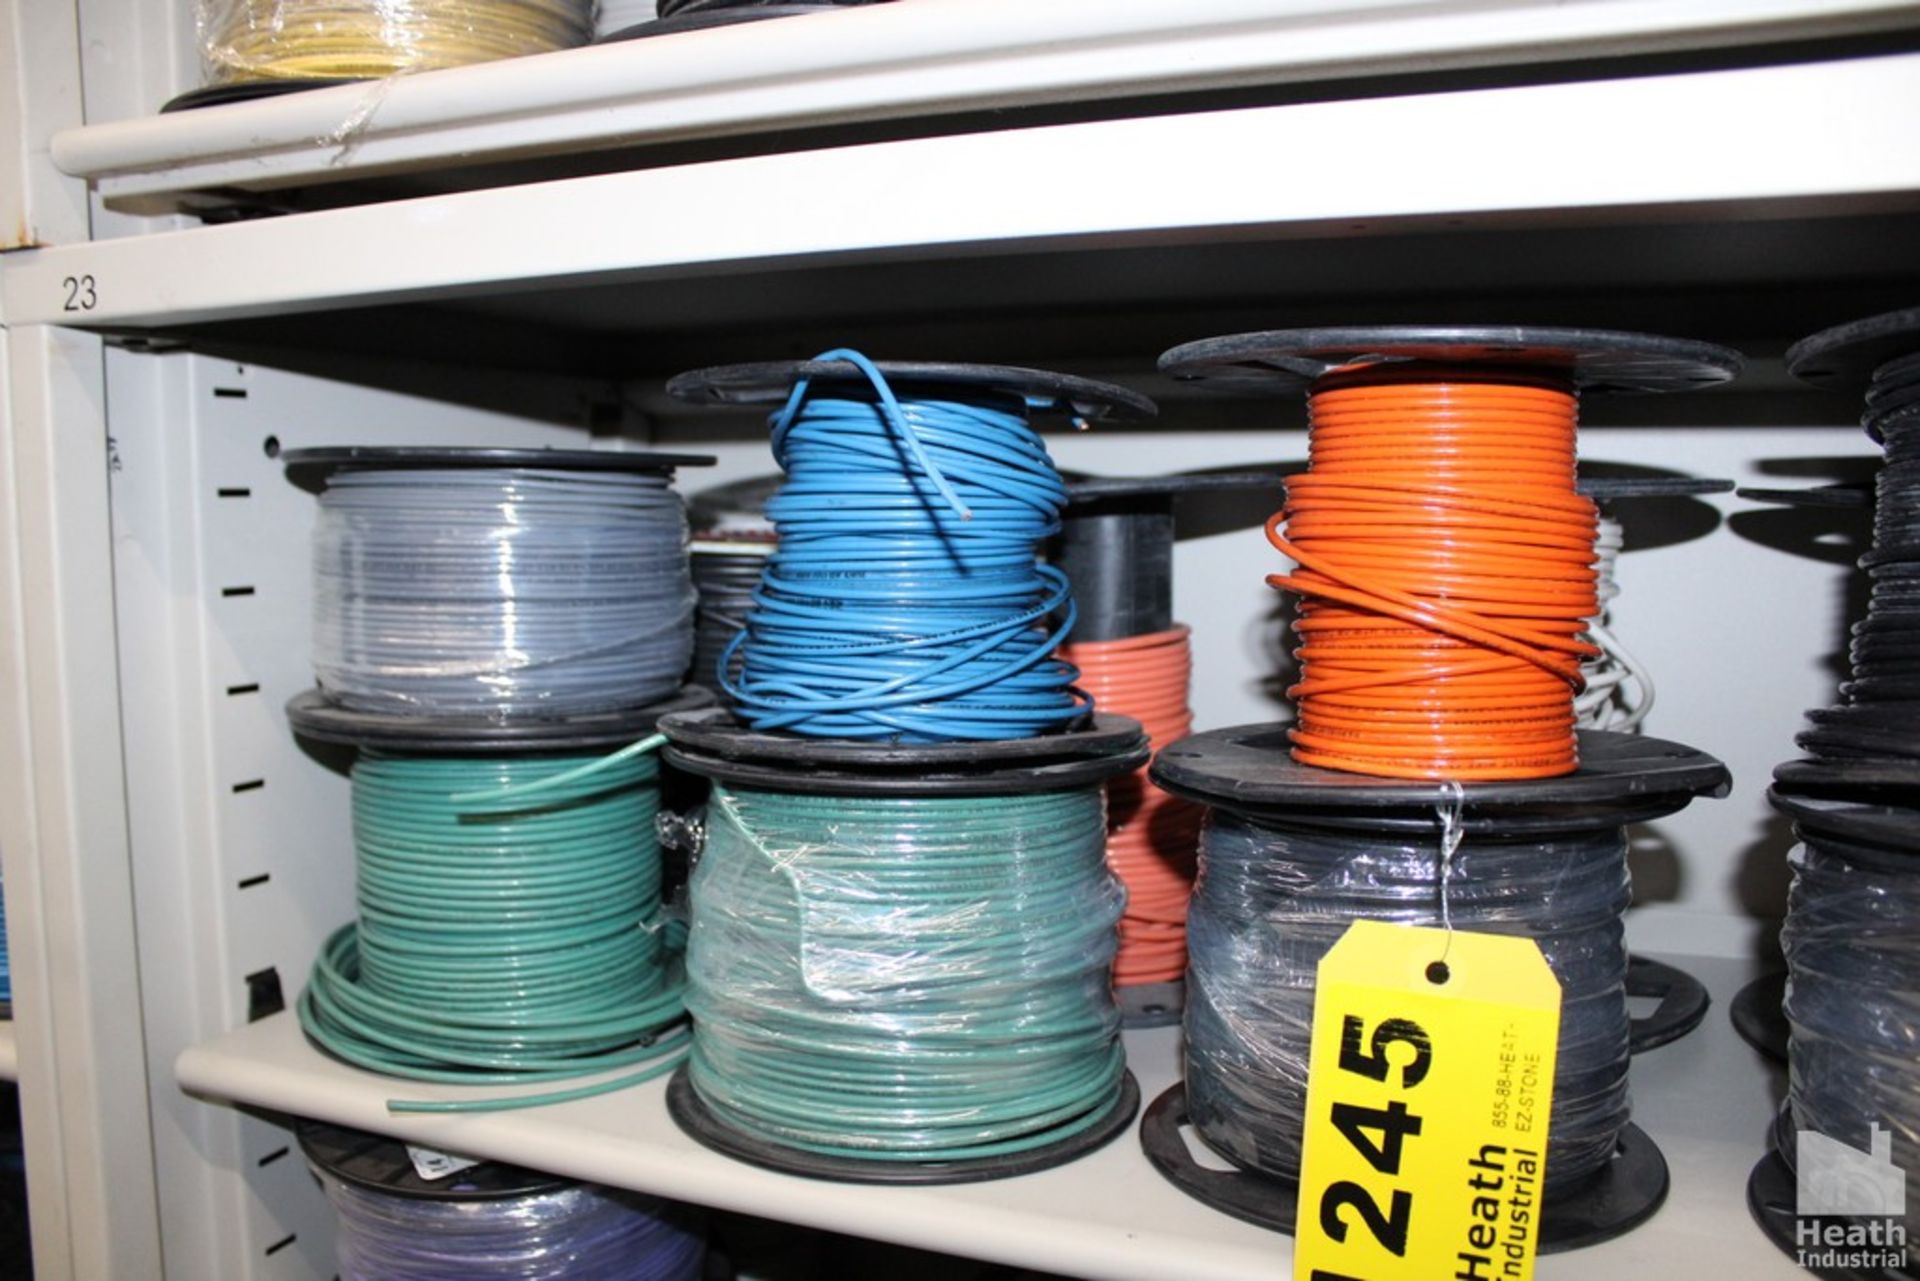 (15) ASSORTED SPOOLS OF WIRE ON SHELF - Image 2 of 3